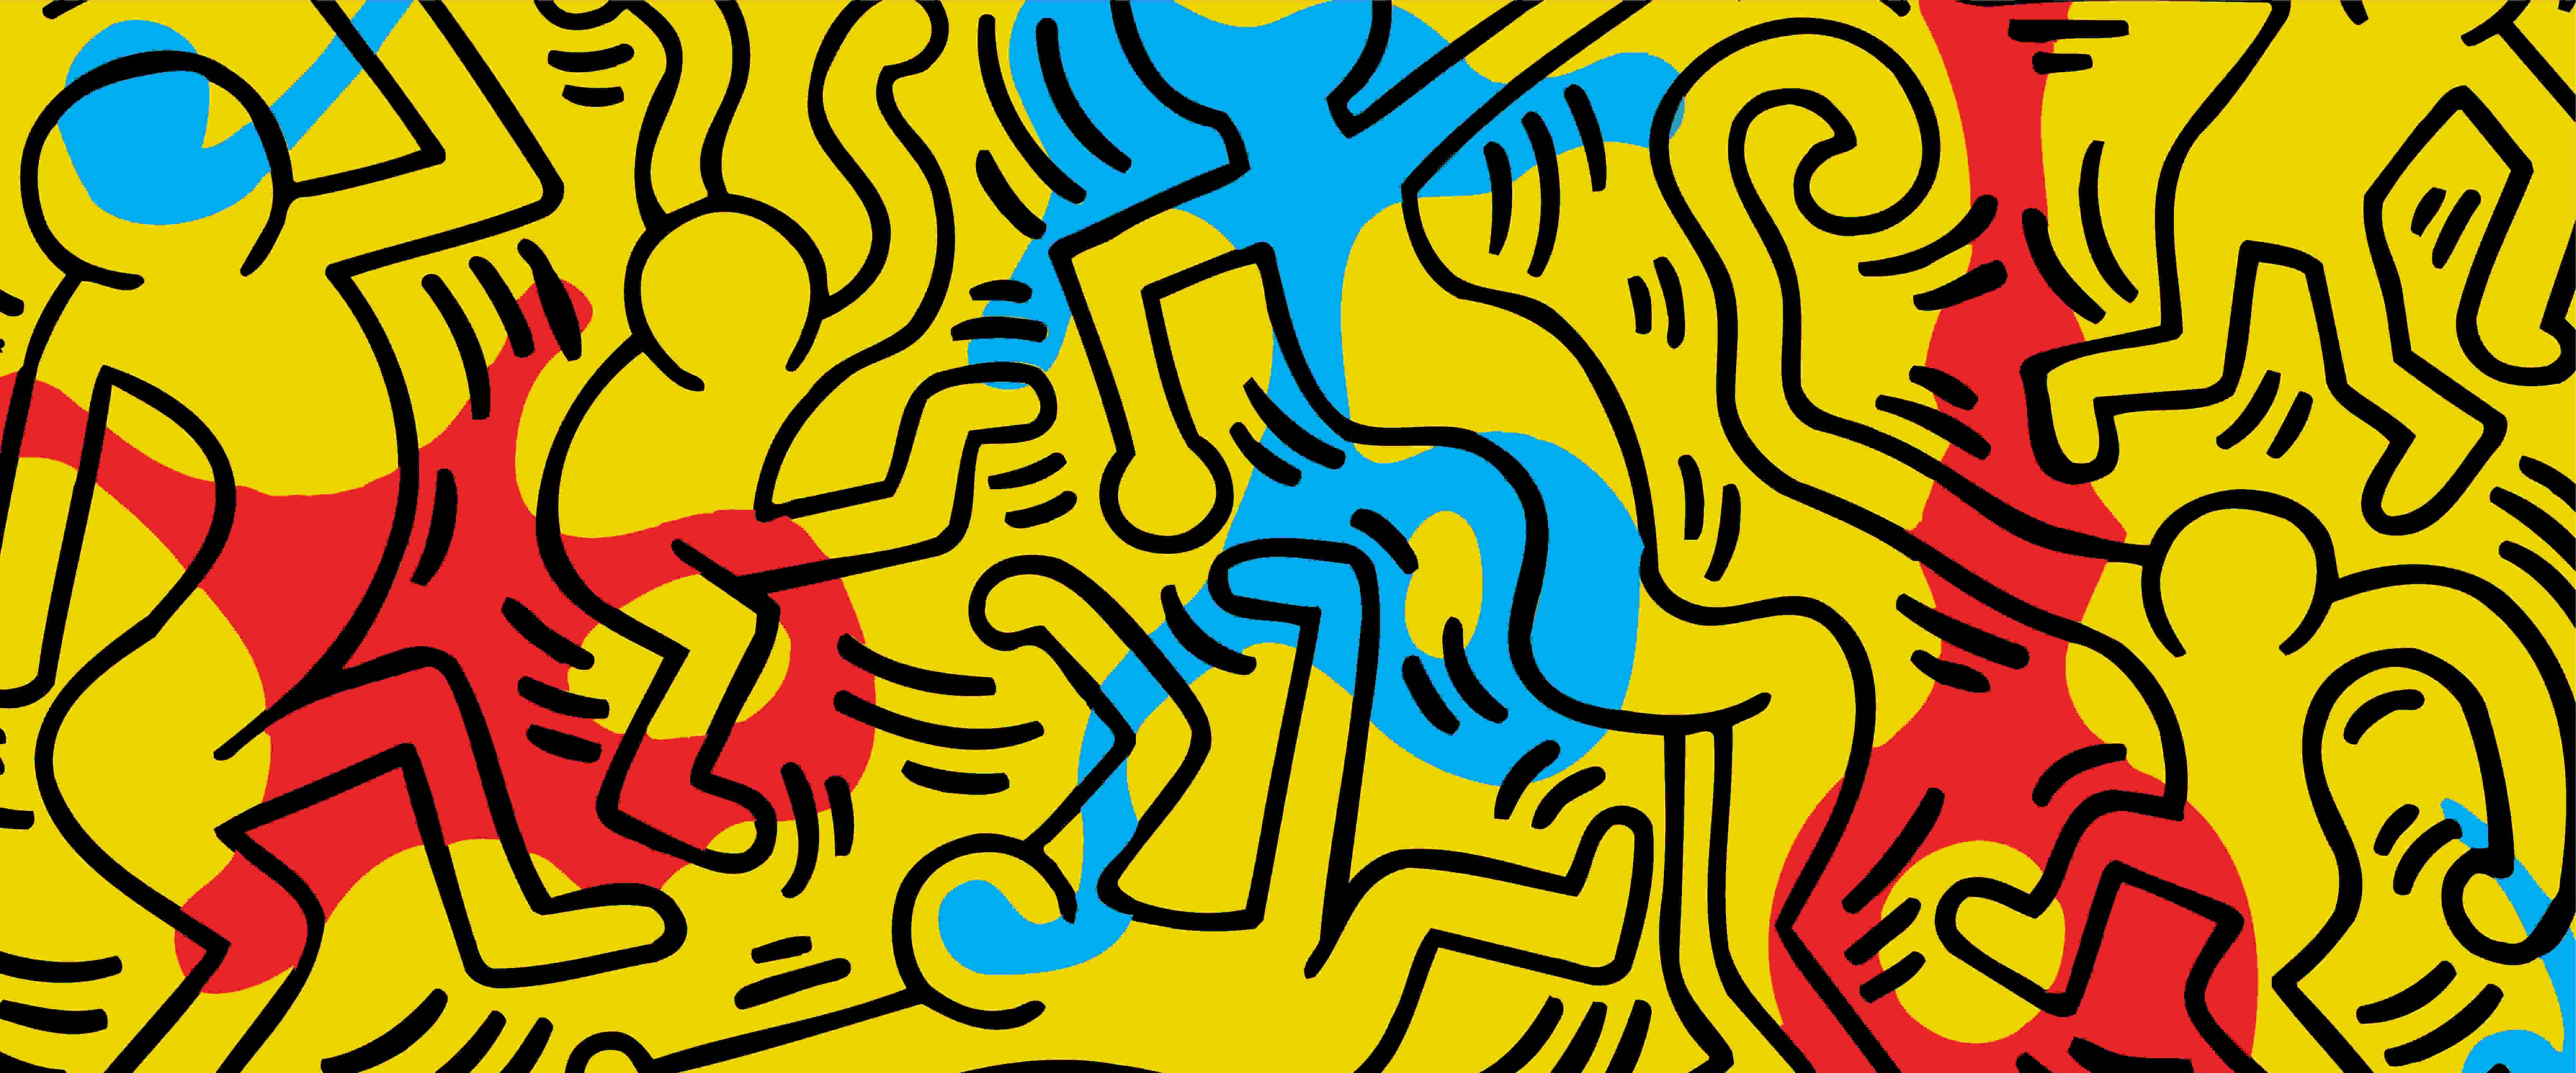 Keith Haring Wallpapers Wallpaper Cave Keith Haring Wallpaper Keith ...